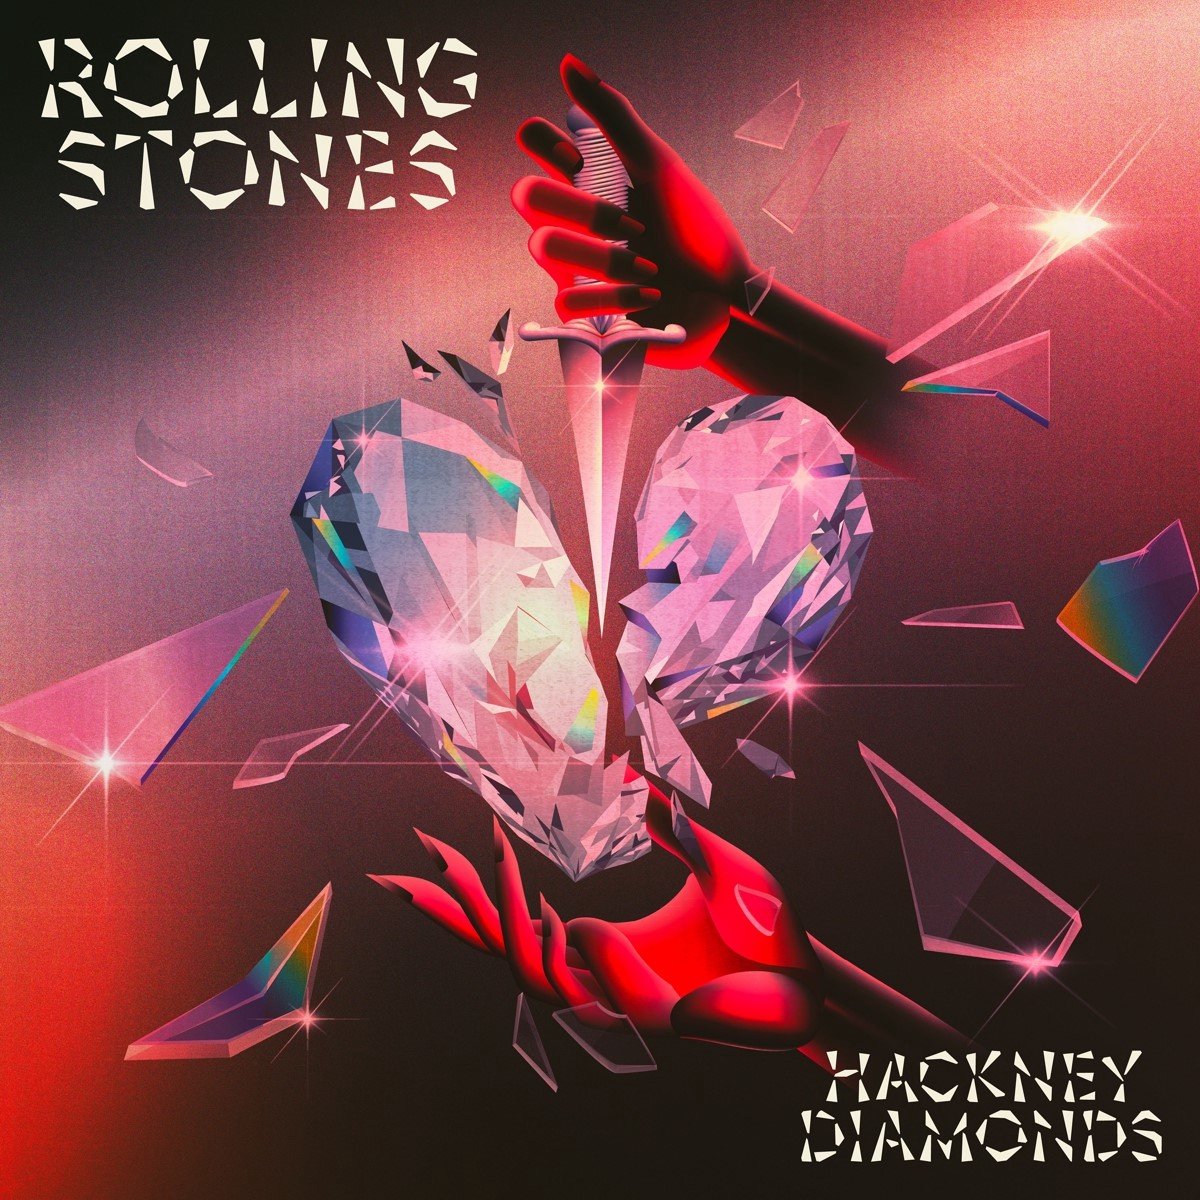 The Rolling Stones - Hackney Diamonds (CD) (Limited Edition) - The Rolling Stones